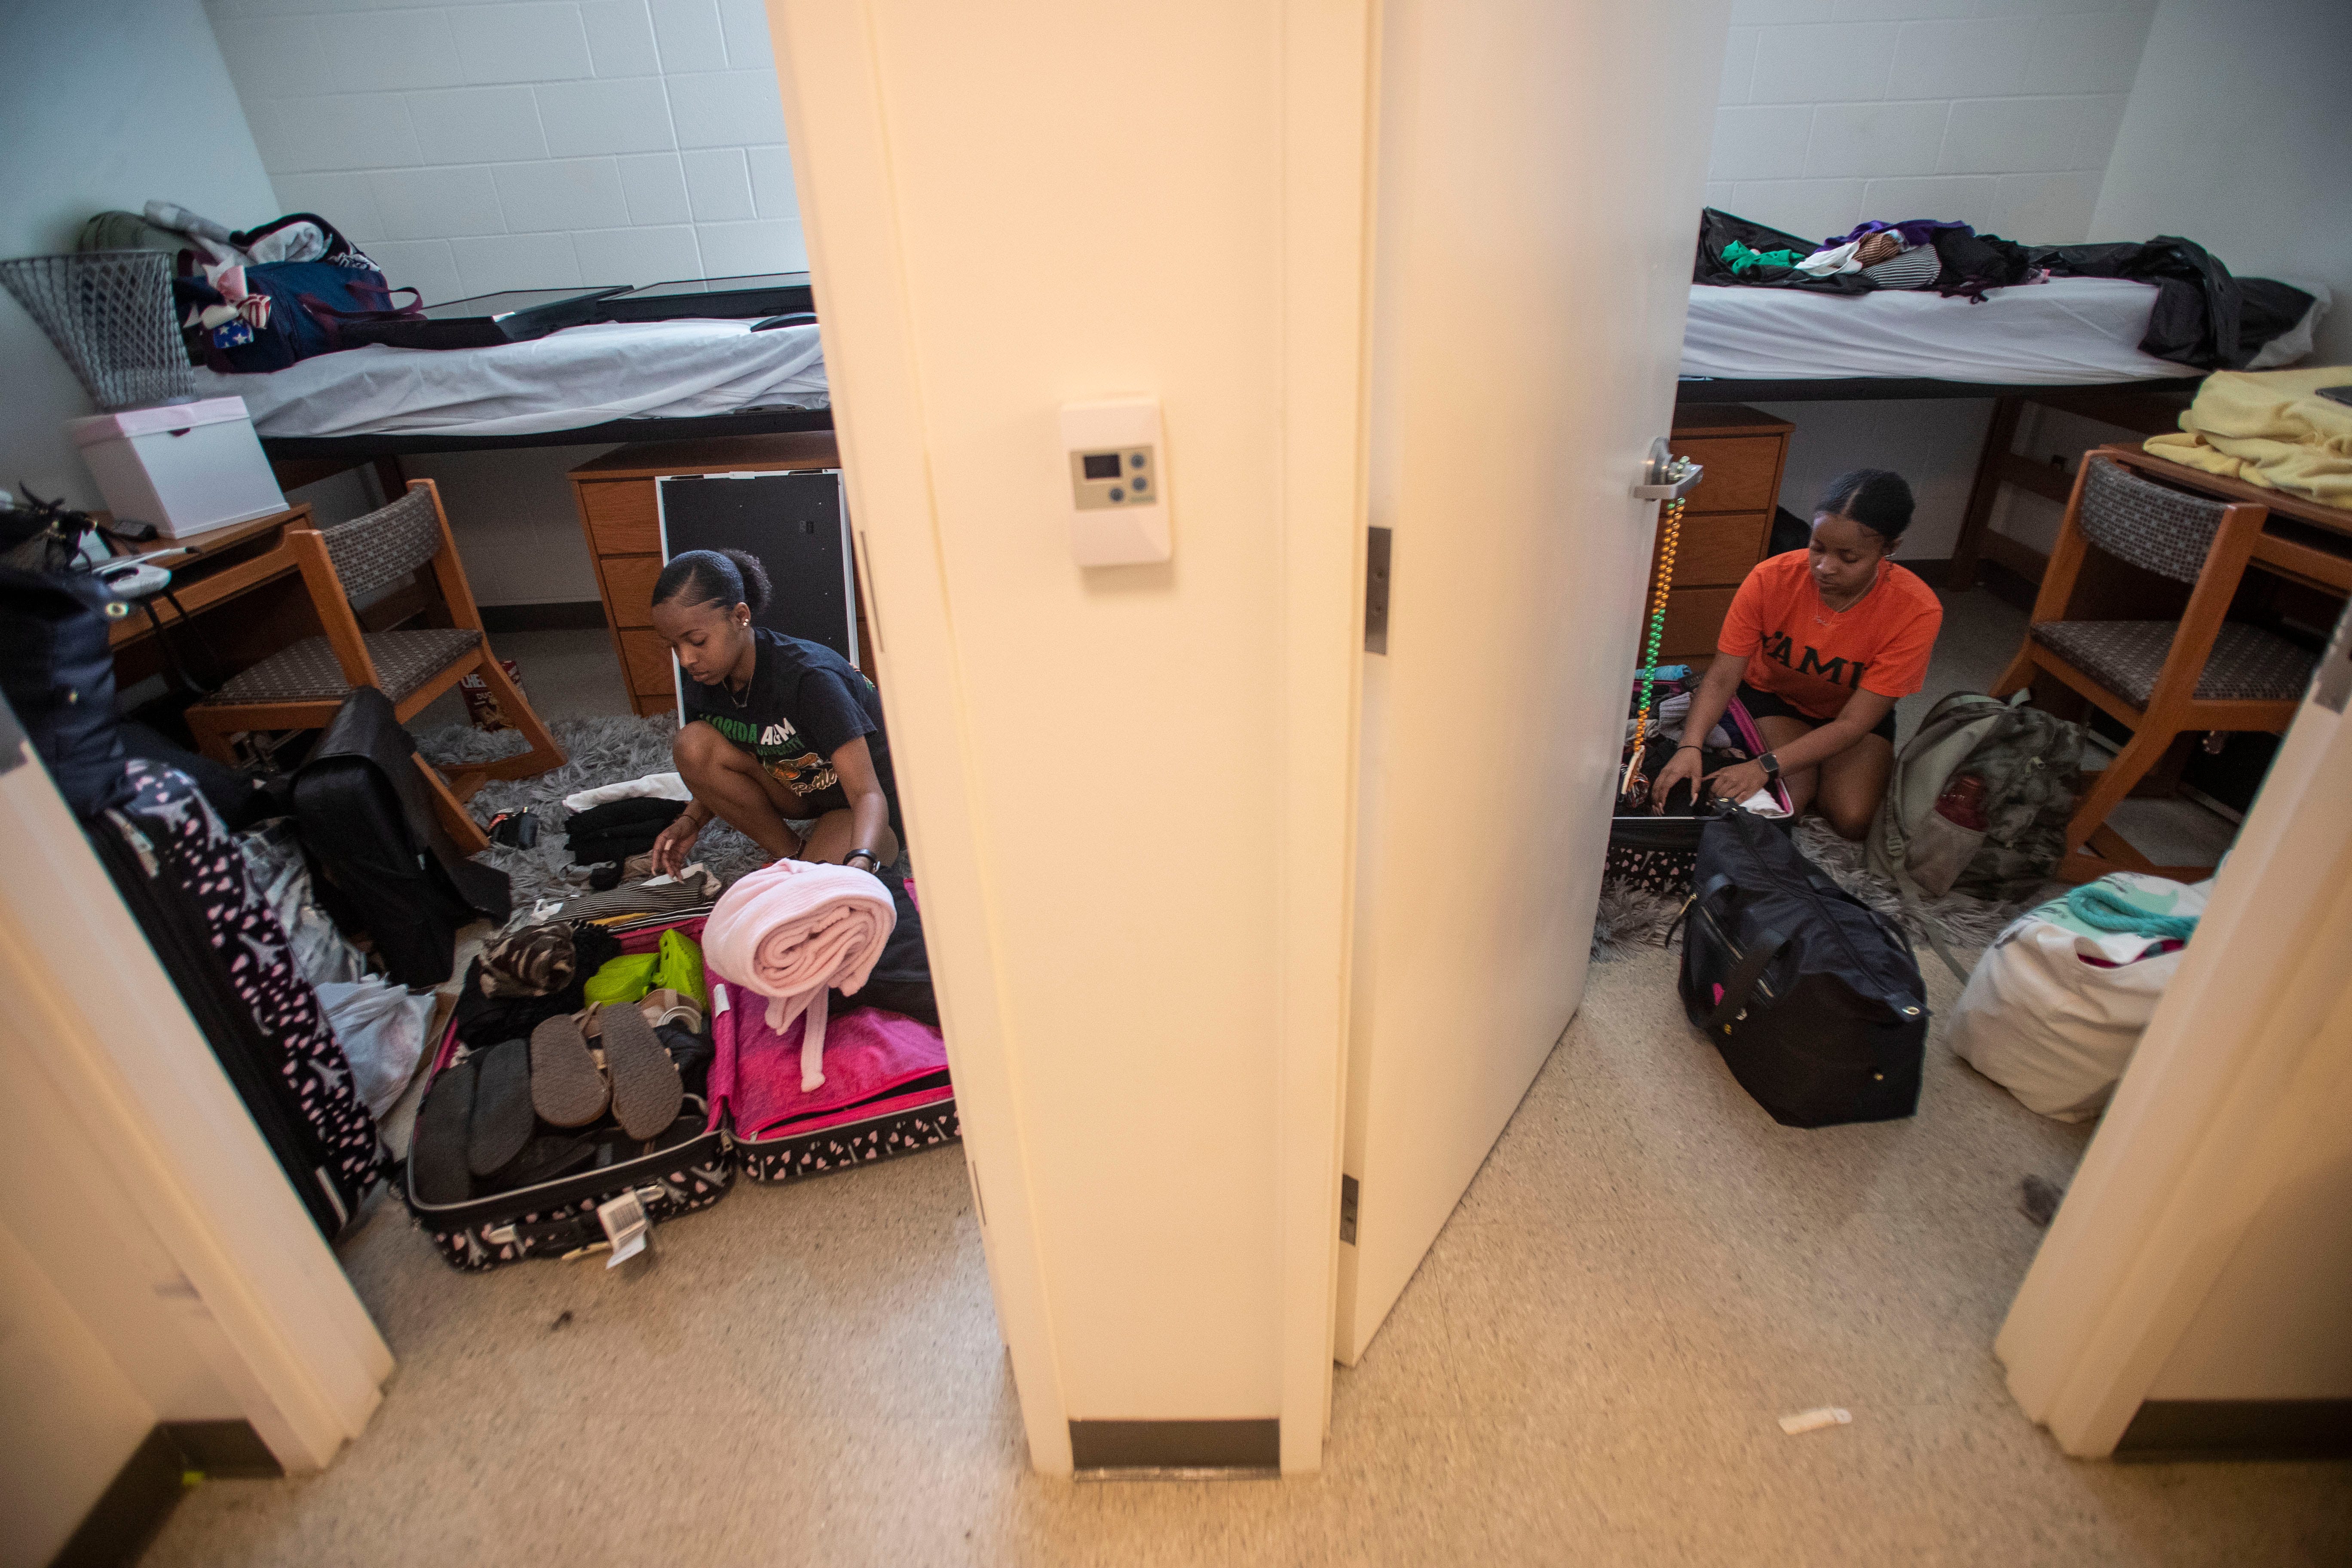 Florida A&M University freshmen twin sisters, Jaelen and Jazlen Patrick, 18, pack up their belongings in their dorm room on Tallahassee, Fla. on March 20, 2020. They were informed the remainder of the spring semester would be conducted online.